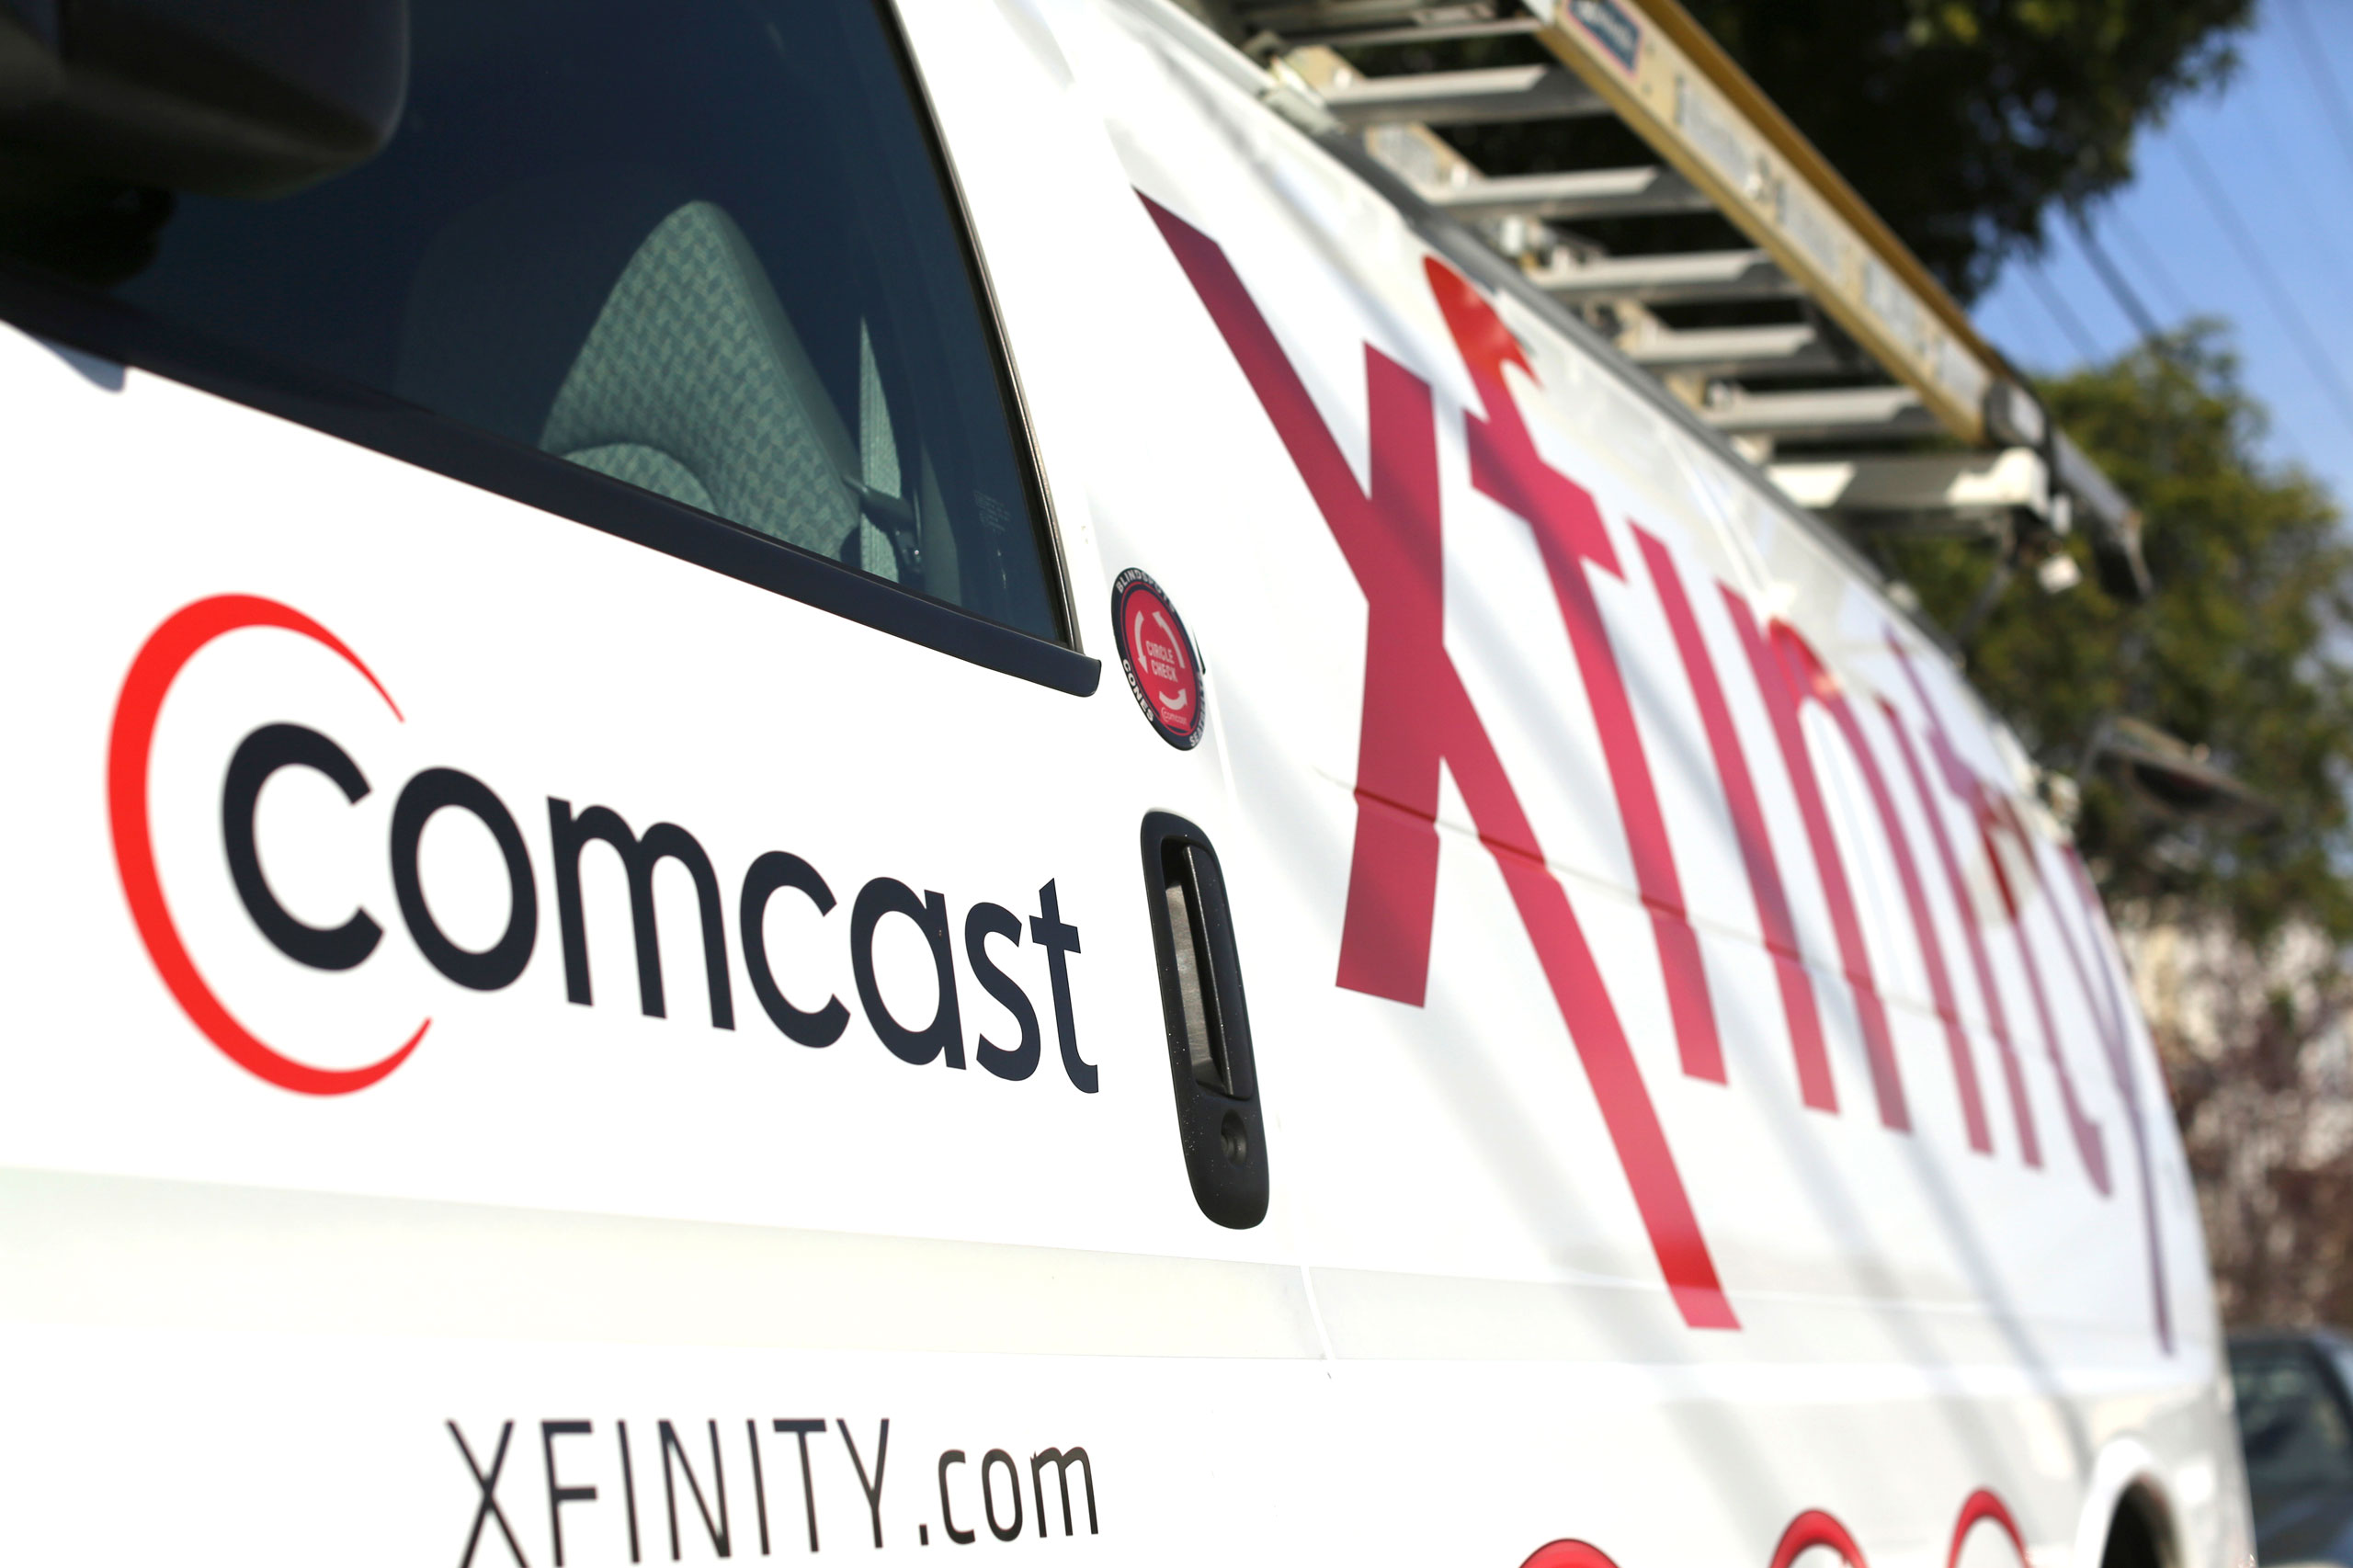 A Comcast logo on the side of a vehicle in San Francisco on Feb. 13, 2014.